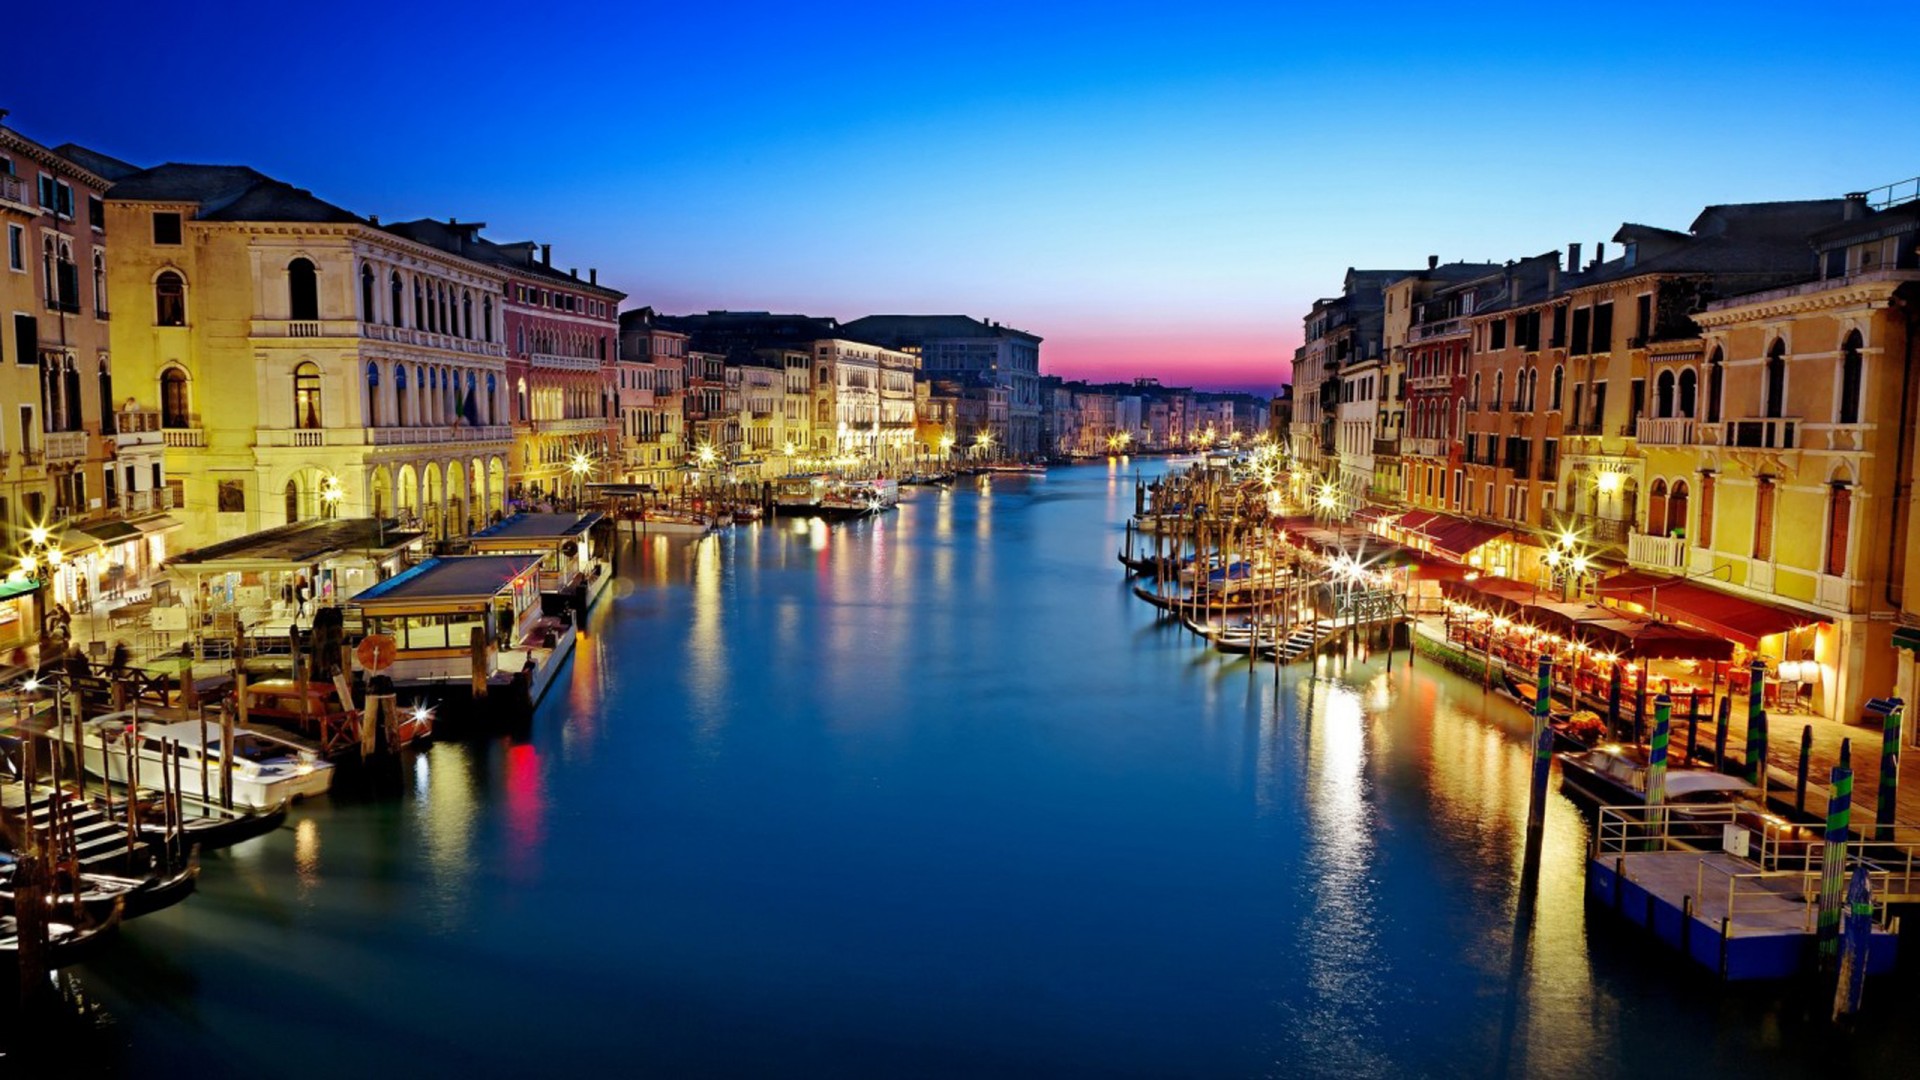 venice wallpaper,waterway,body of water,canal,town,sky